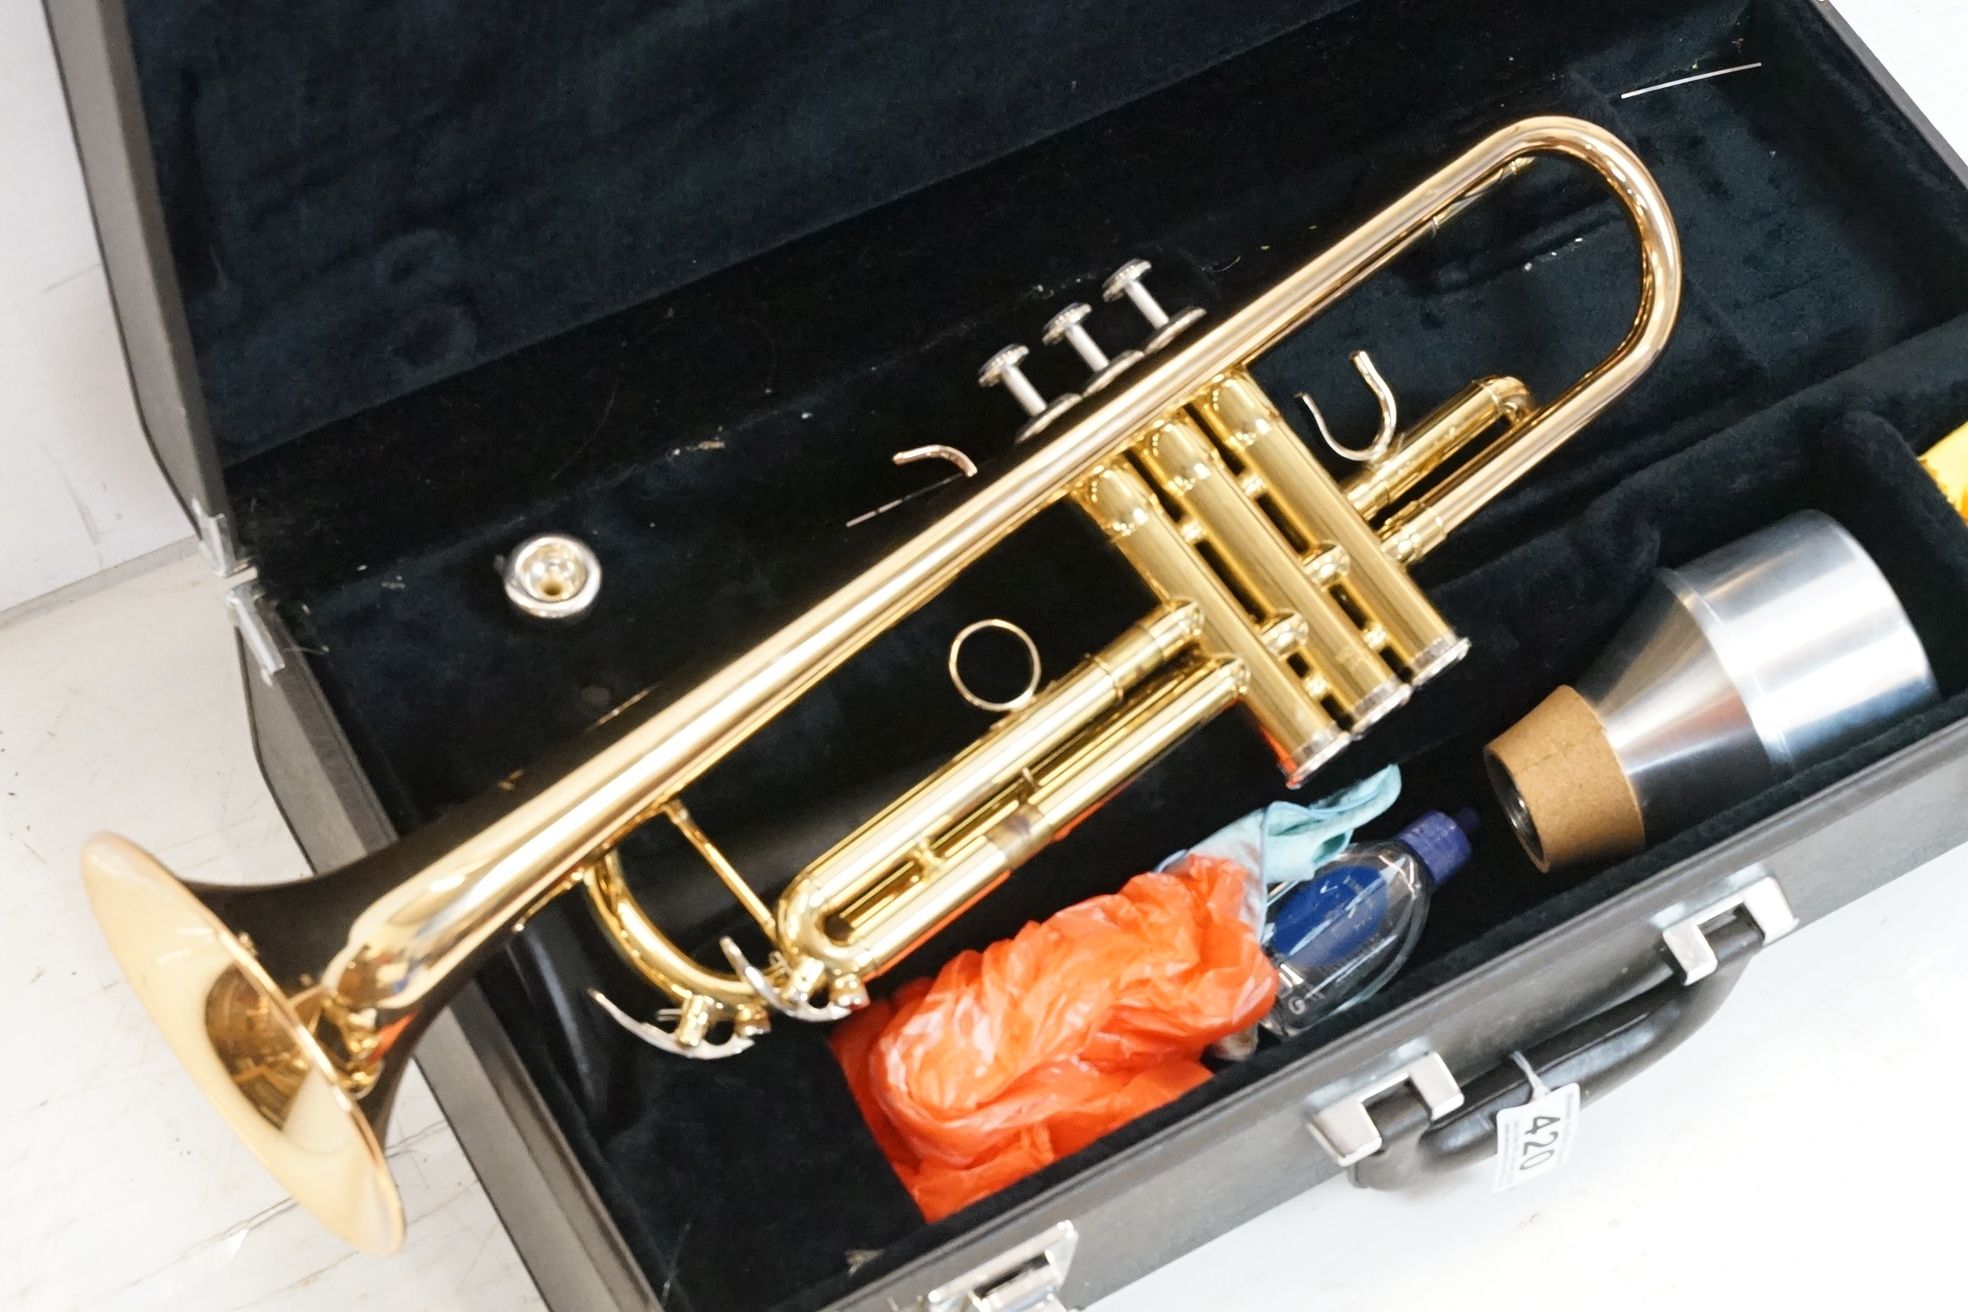 Yamaha YTR 43356 brass trumpet, serial no. 684174, with mouthpiece, in fitted case. - Image 5 of 9